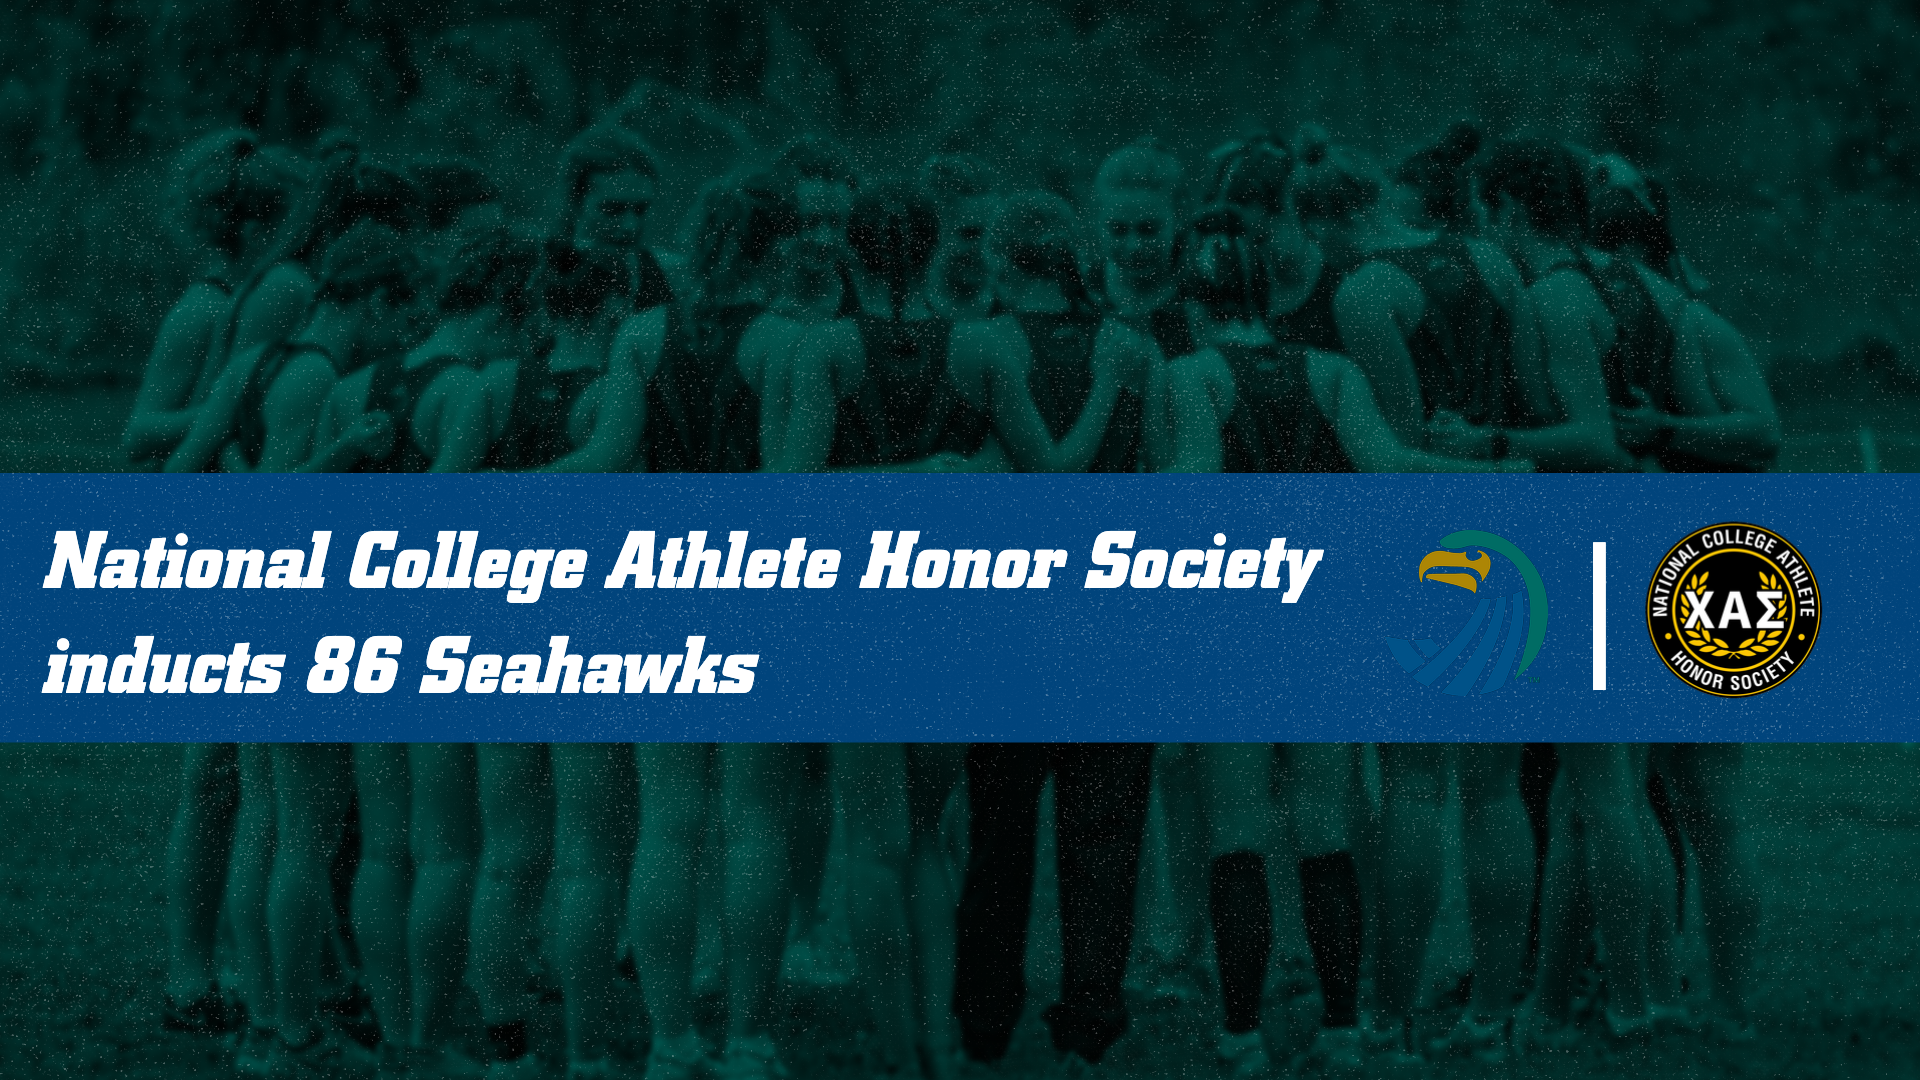 86 Seahawks inducted into Chi Alpha Sigma National College Athlete Honor Society